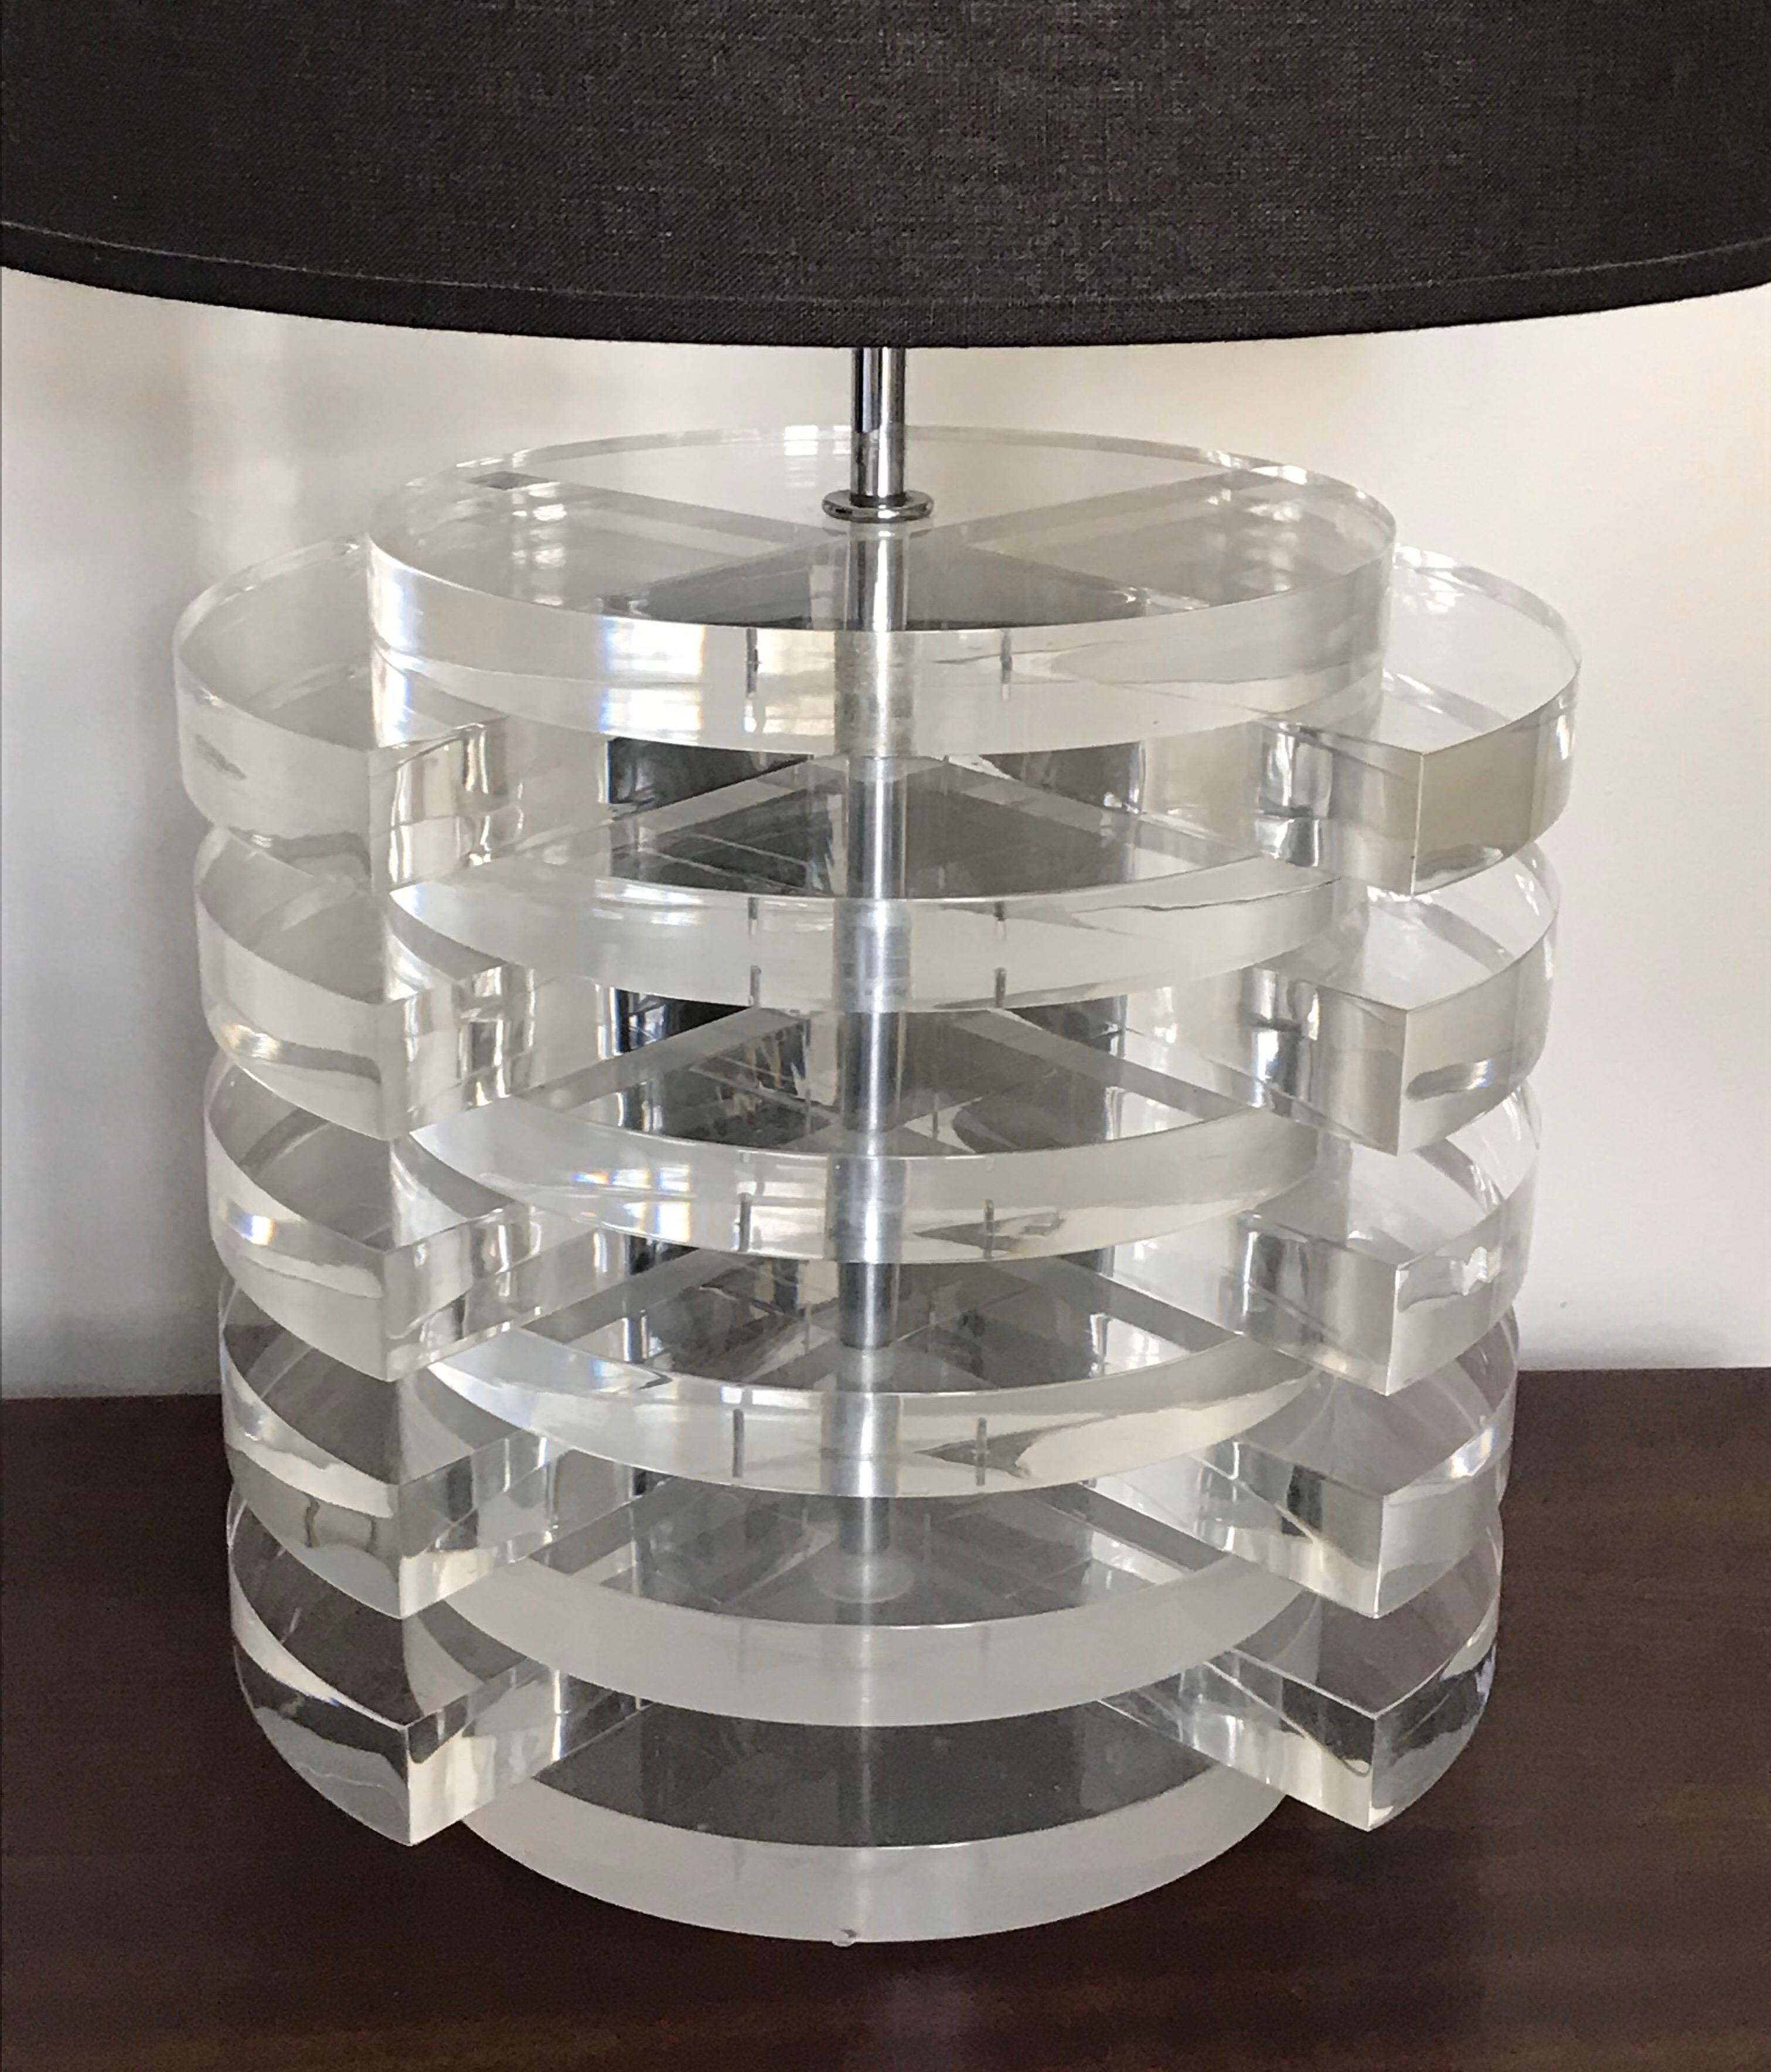 Impressive midcentury Lucite stacked disk table lamp by Karl Springer, 1970s

Shade not included.